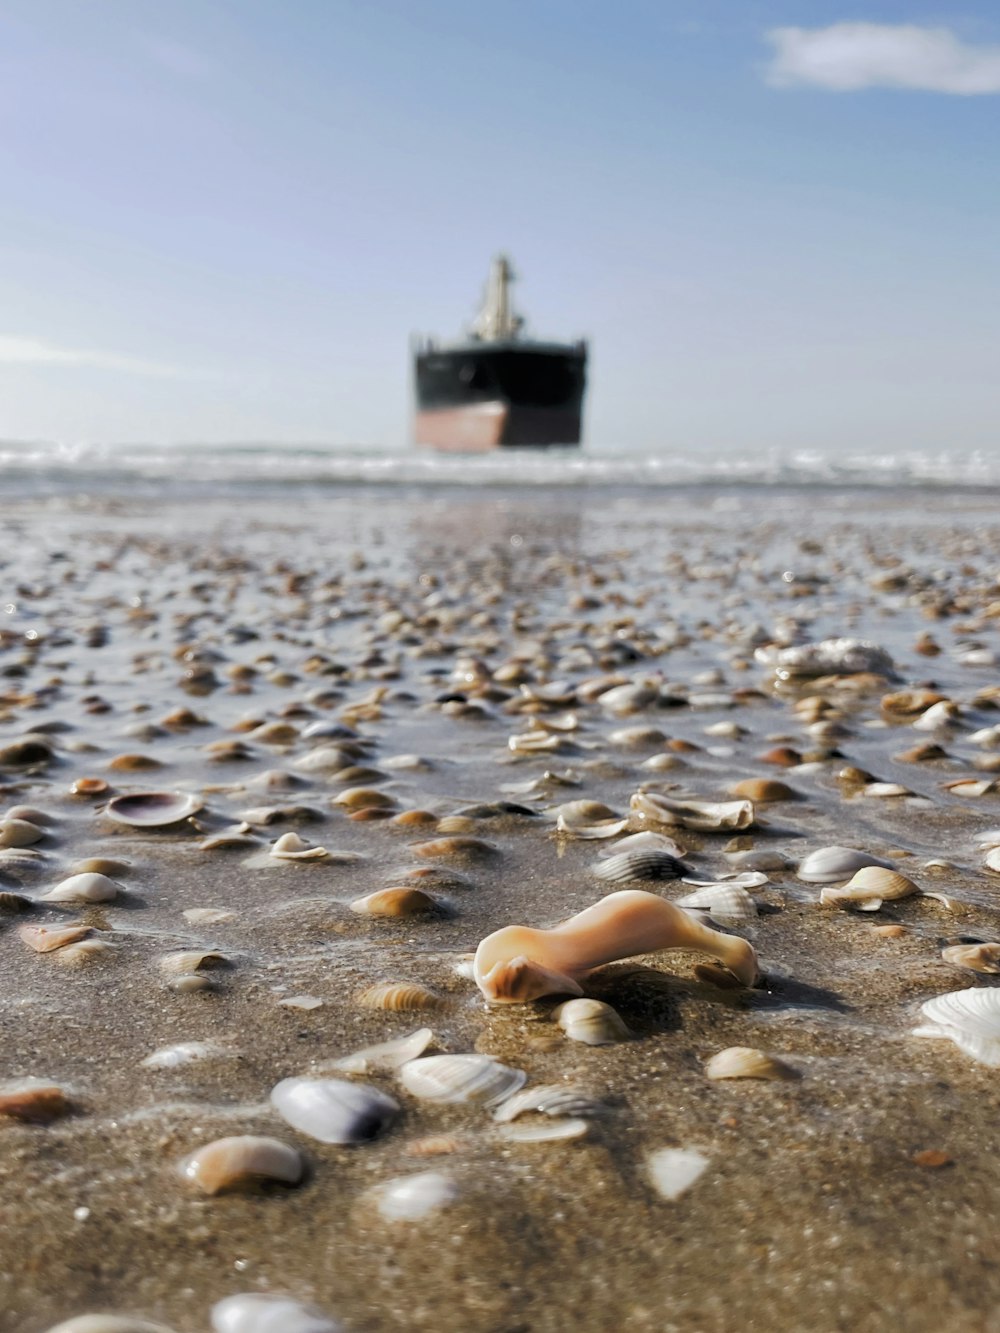 a beach with shells and a ship in the background